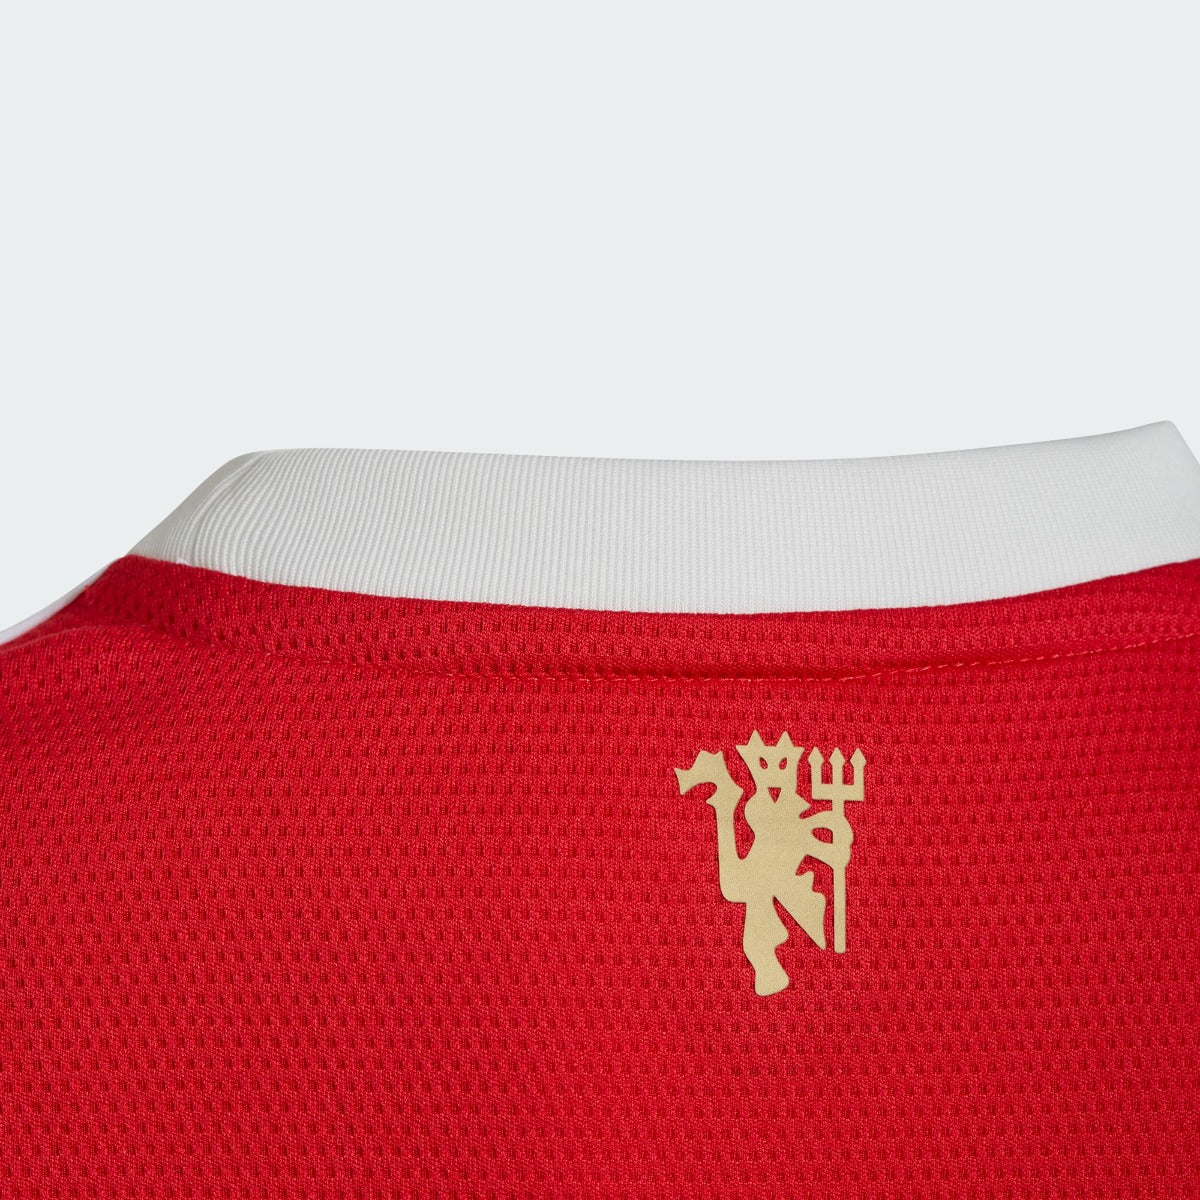 Adidas 2021-22 Manchester United Youth Home Jersey - Red-White (Detail 2)